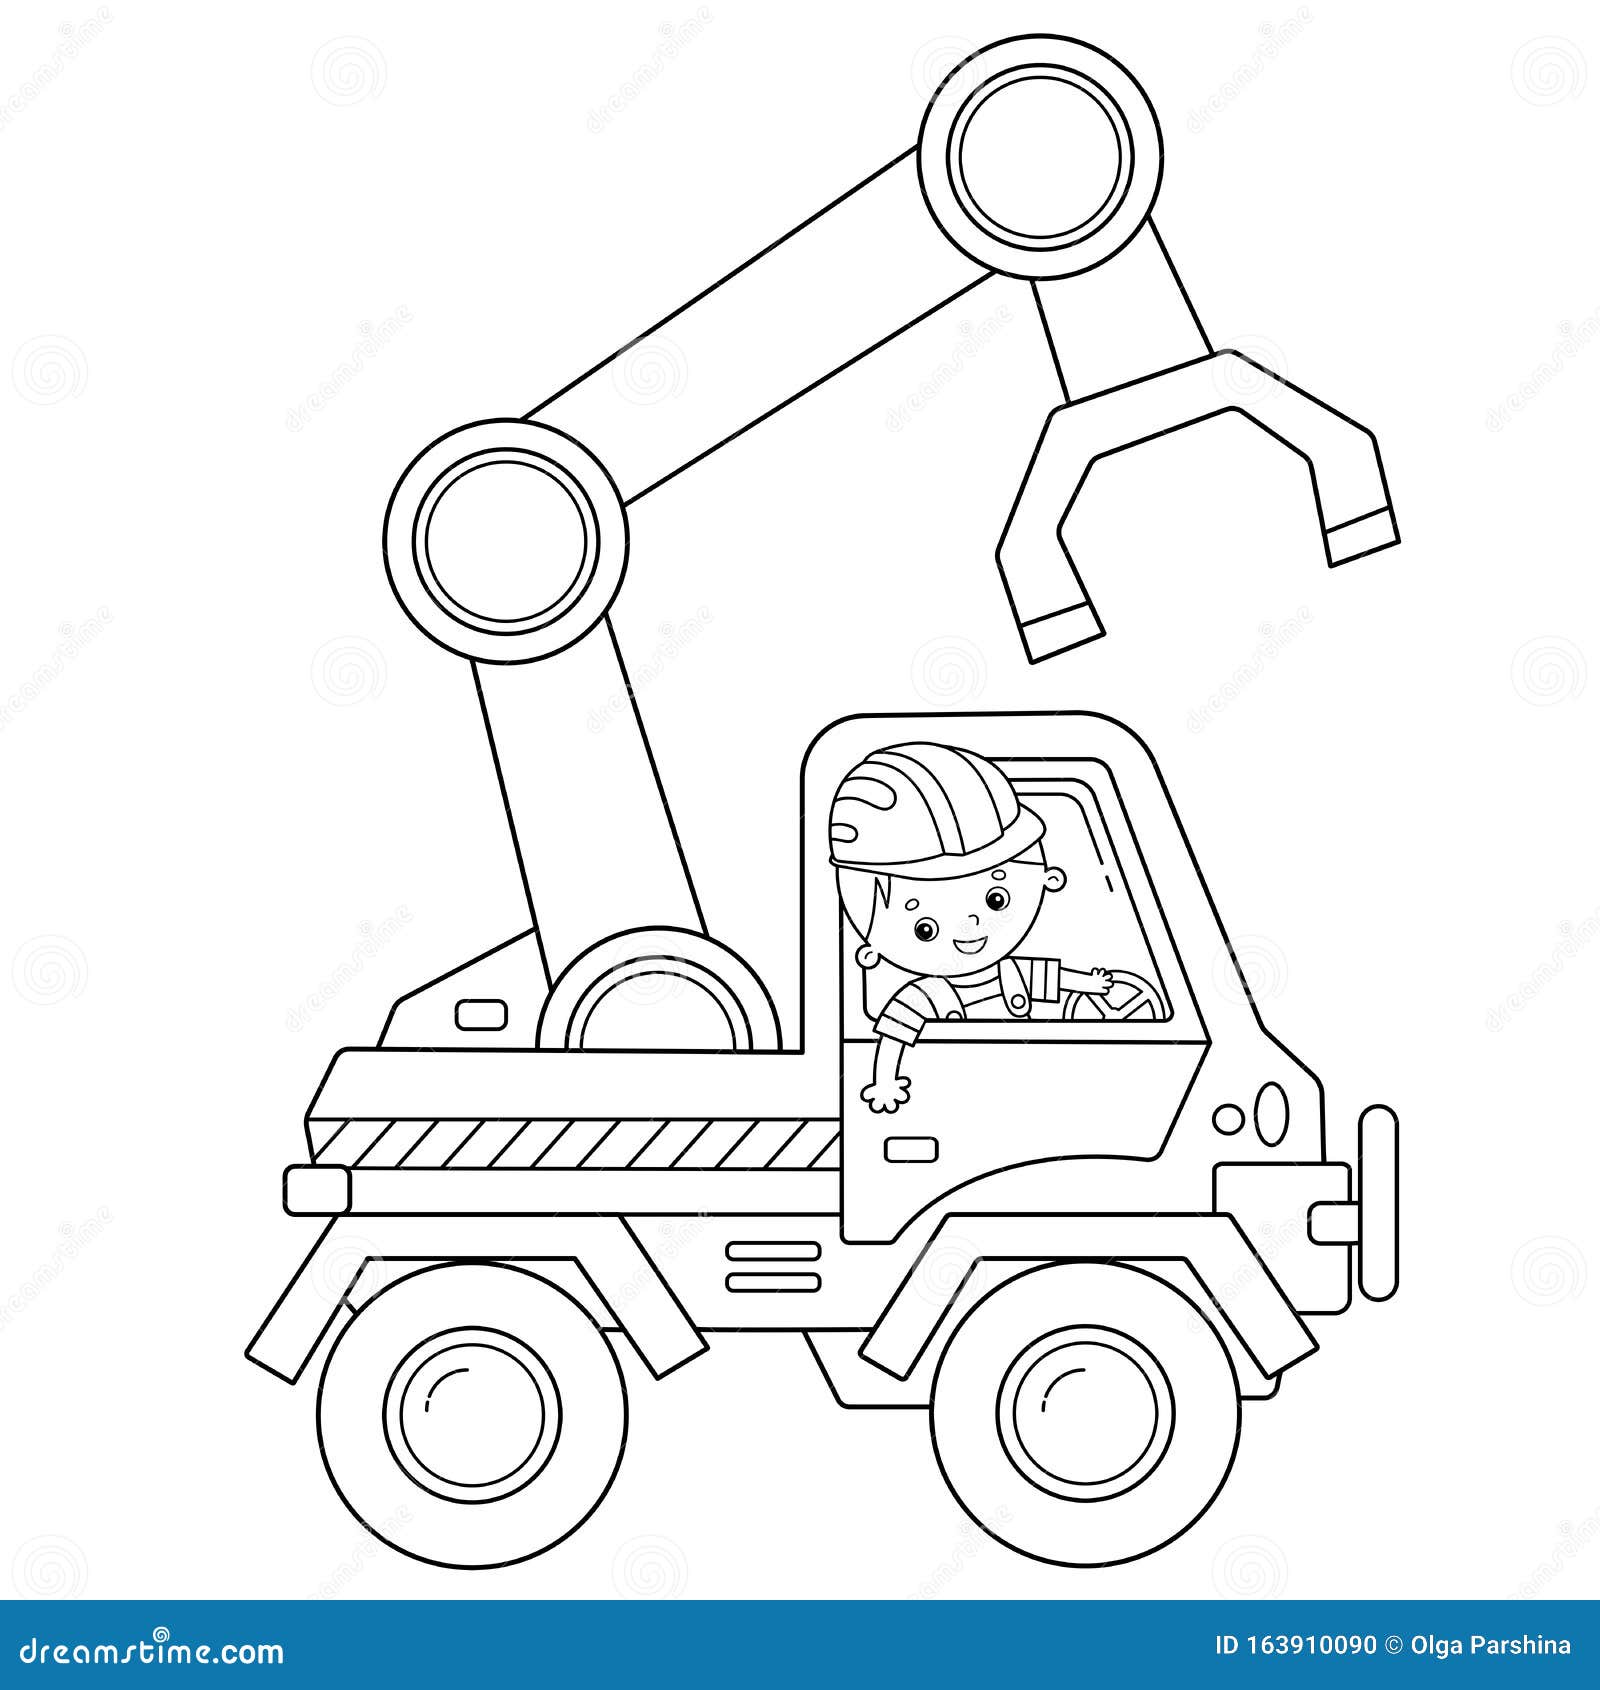 Coloring Construction Stock Illustrations 4 205 Coloring Construction Stock Illustrations Vectors Clipart Dreamstime